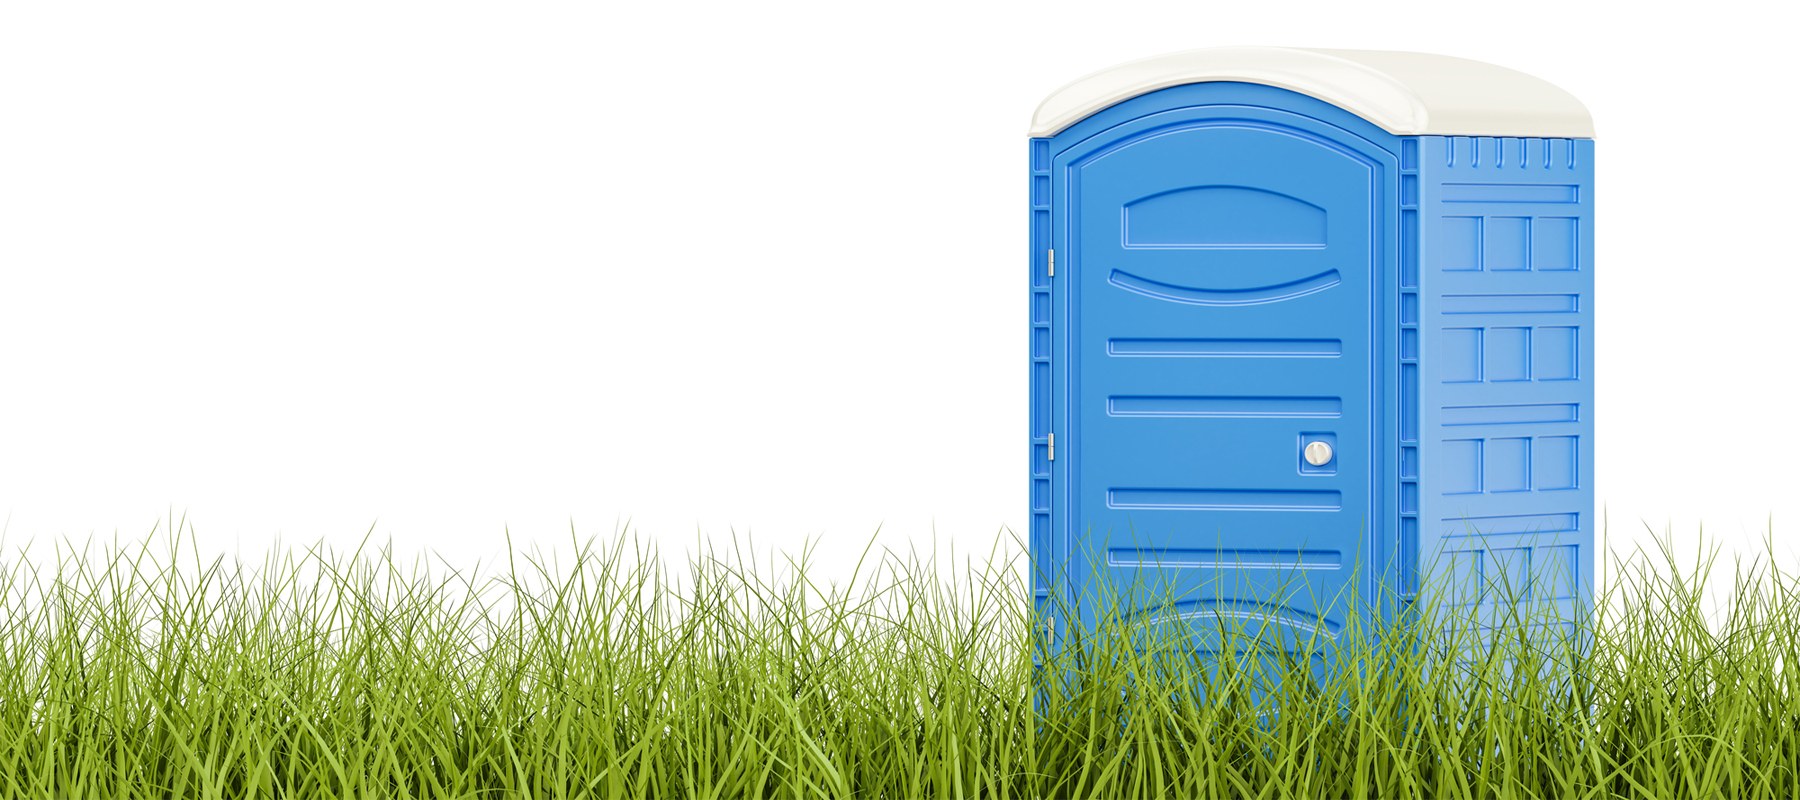 How Much Does a Portable Potty Cost to Rent?